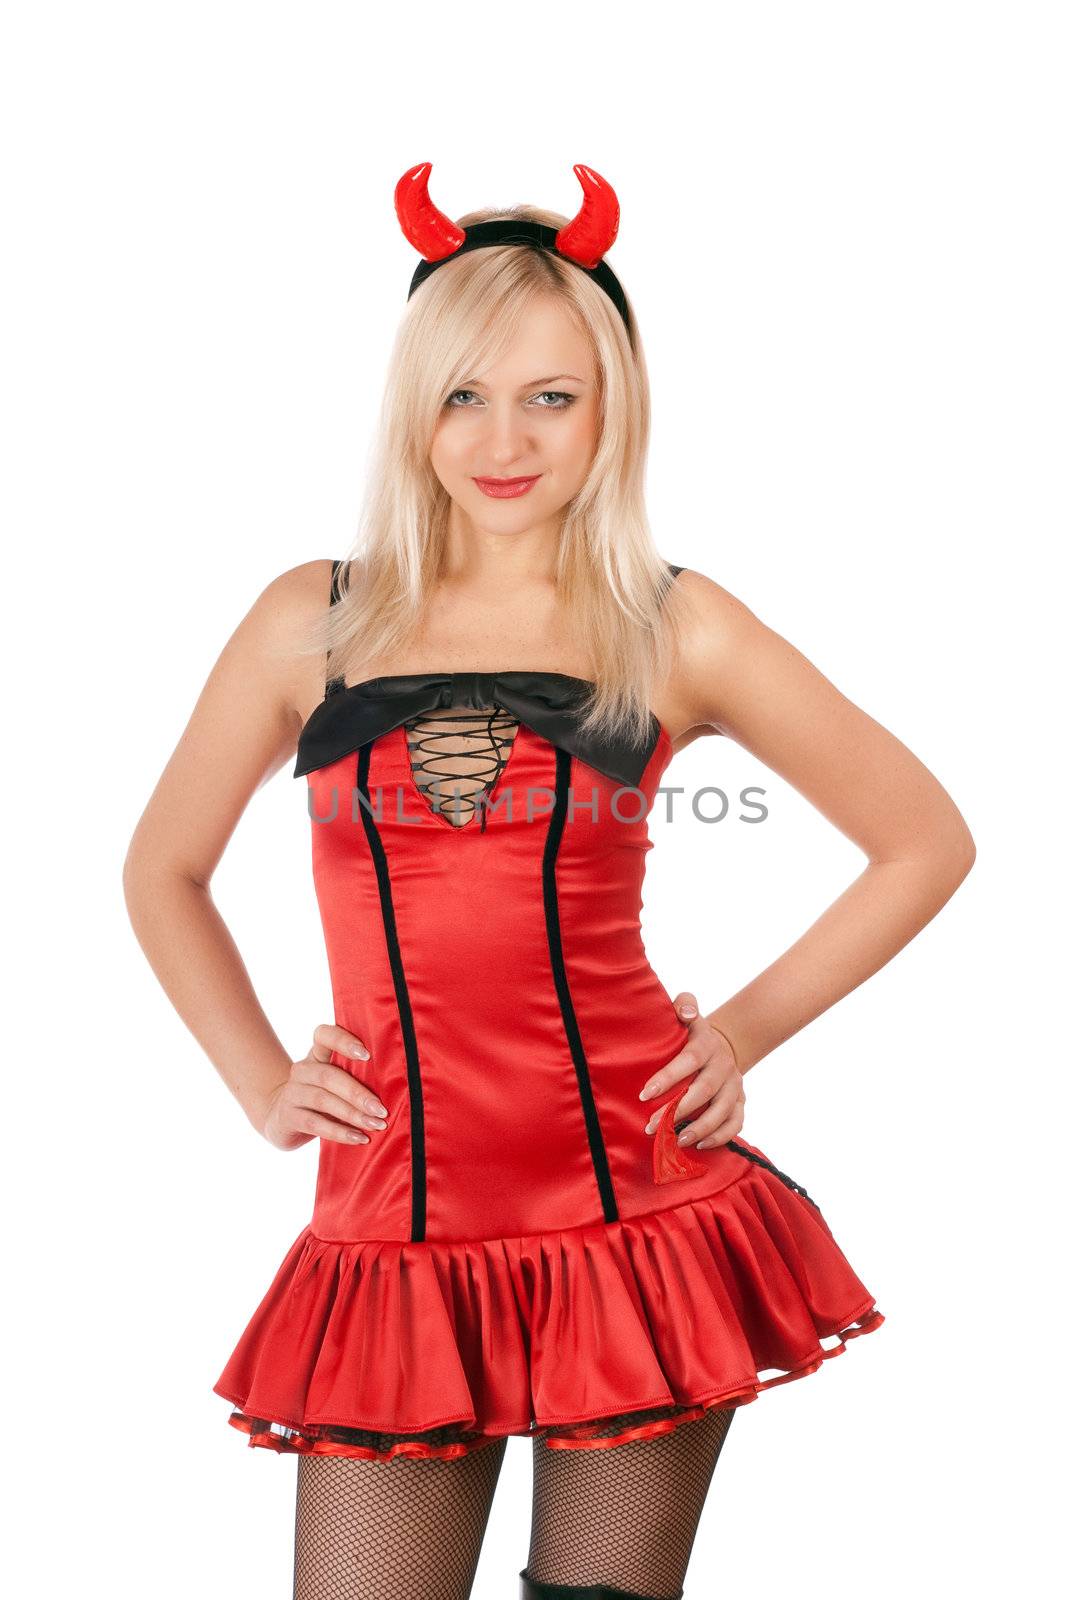 Nice blonde is wearing a sexy devil costume